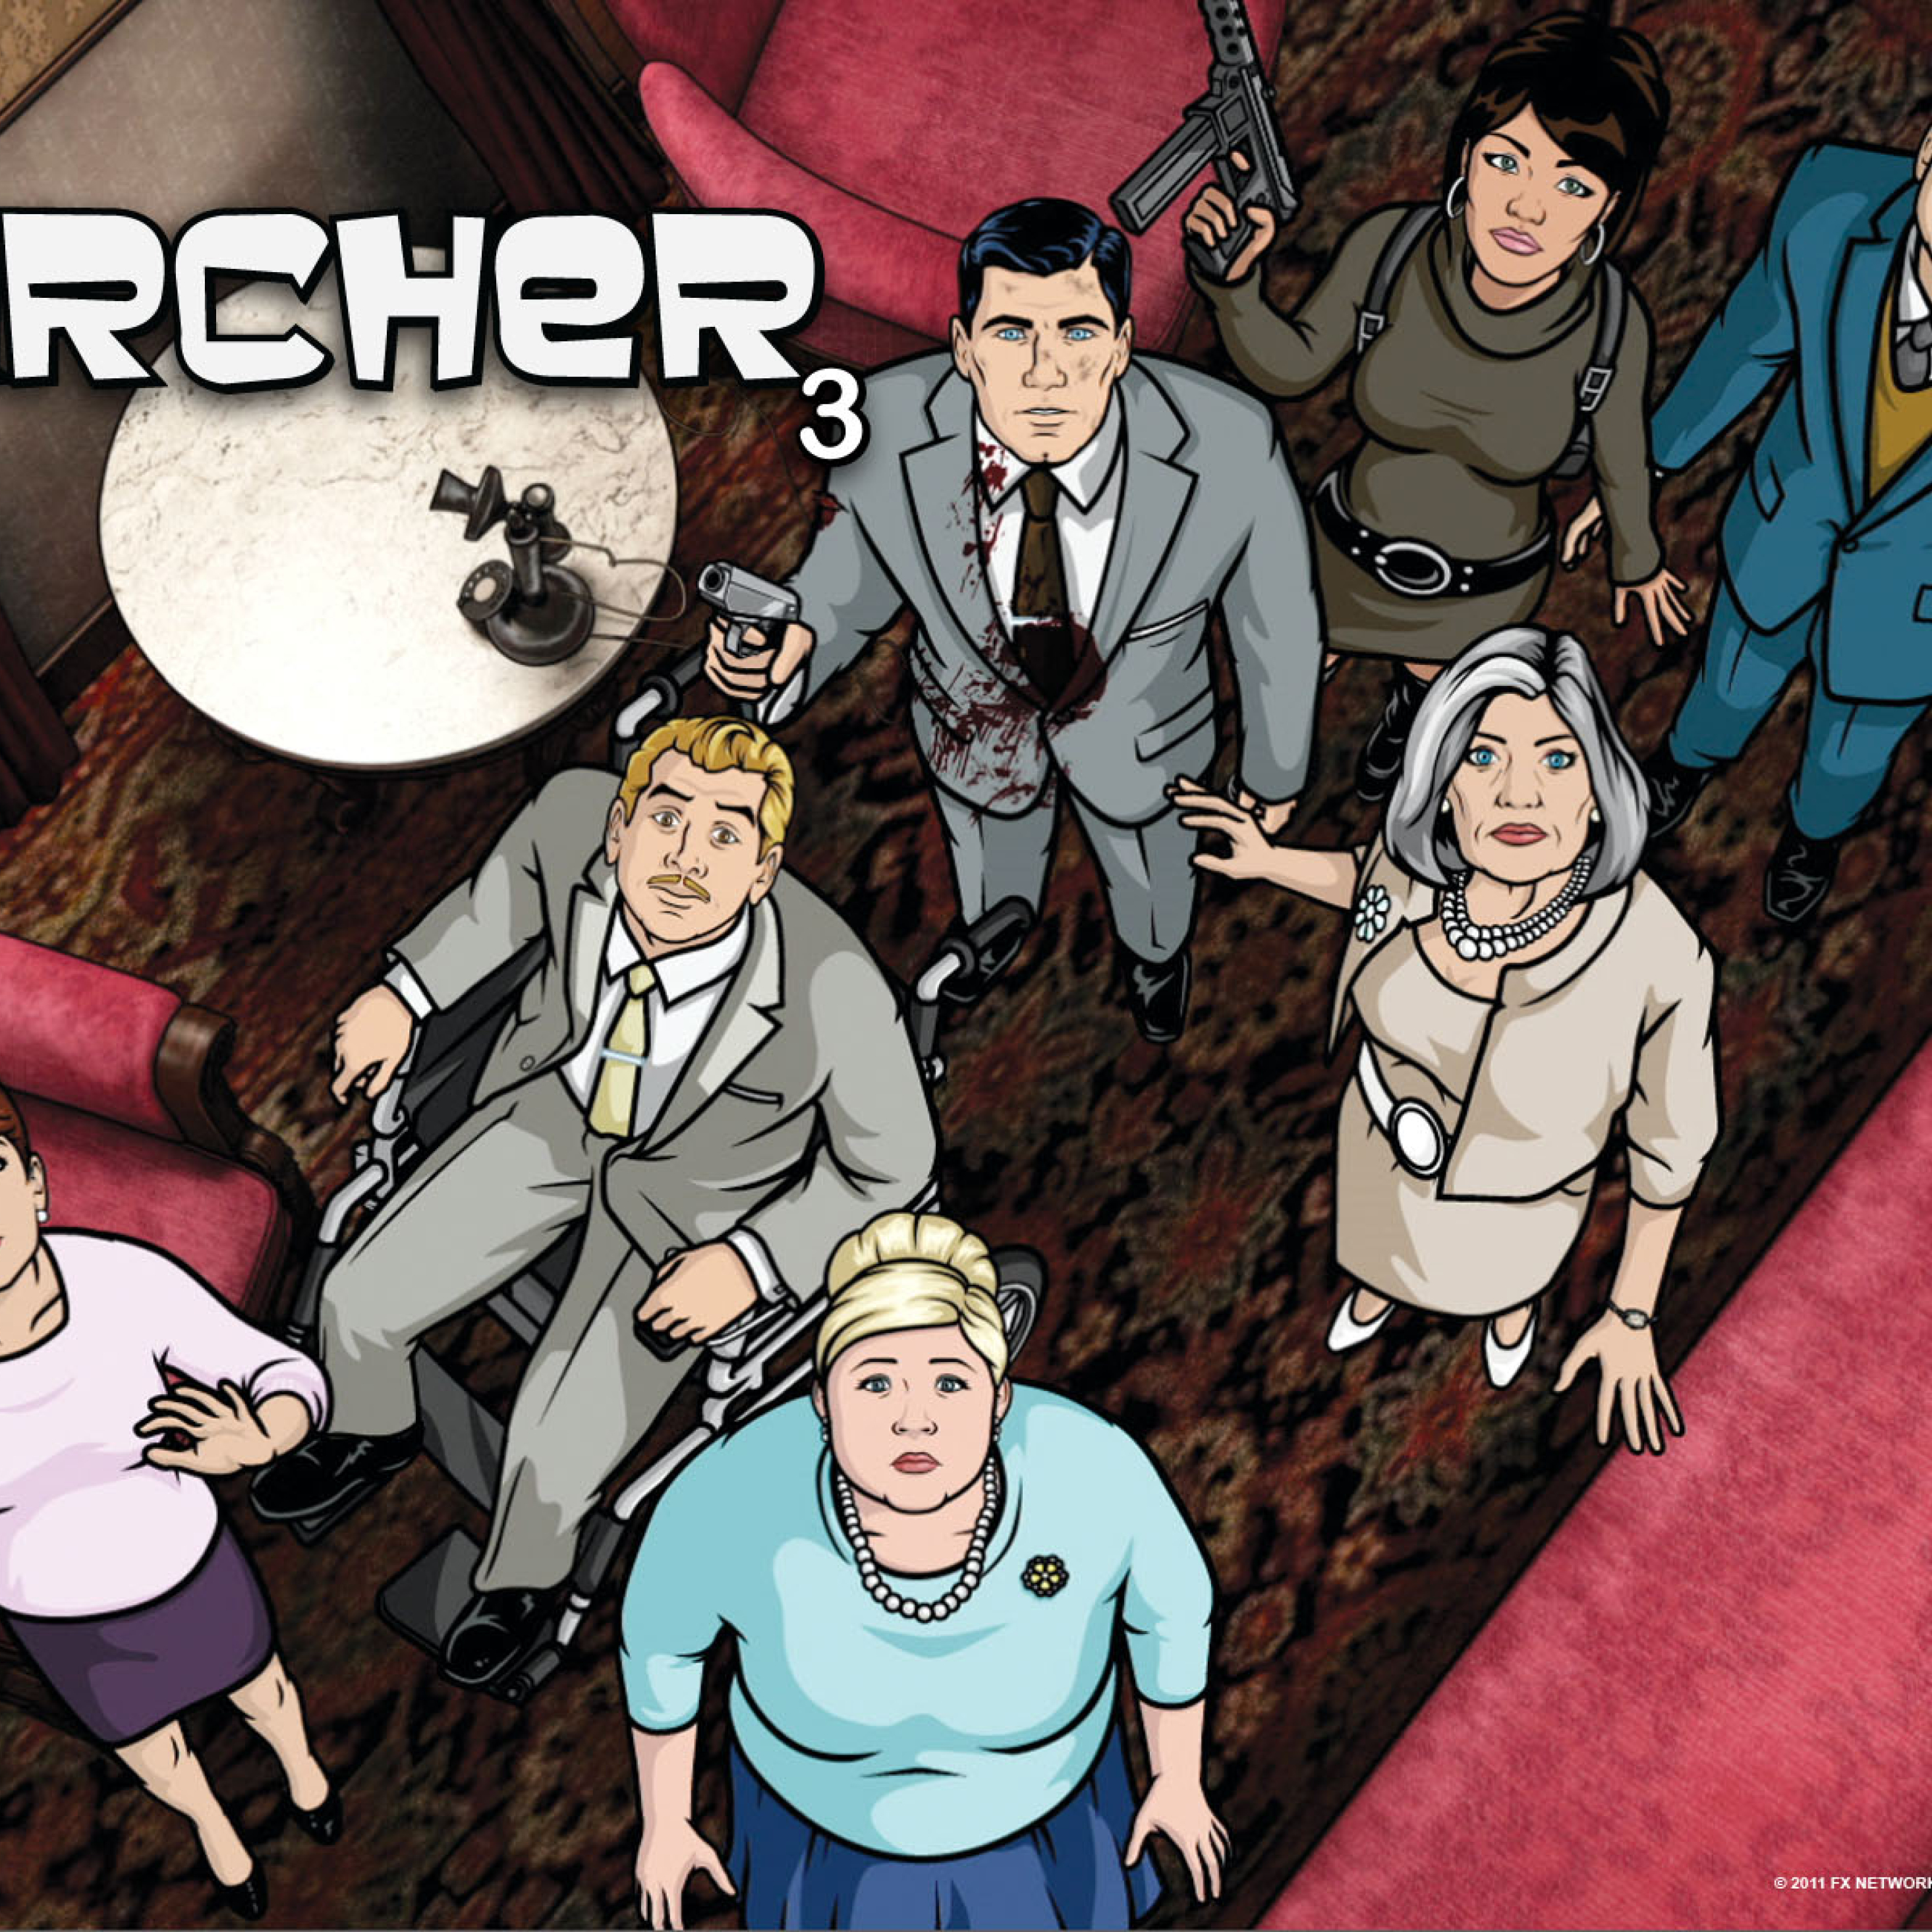 2932x2932 archer, sterling archer, cheryl tunt Ipad Pro Retina Display  Wallpaper, HD TV Series 4K Wallpapers, Images, Photos and Background -  Wallpapers Den